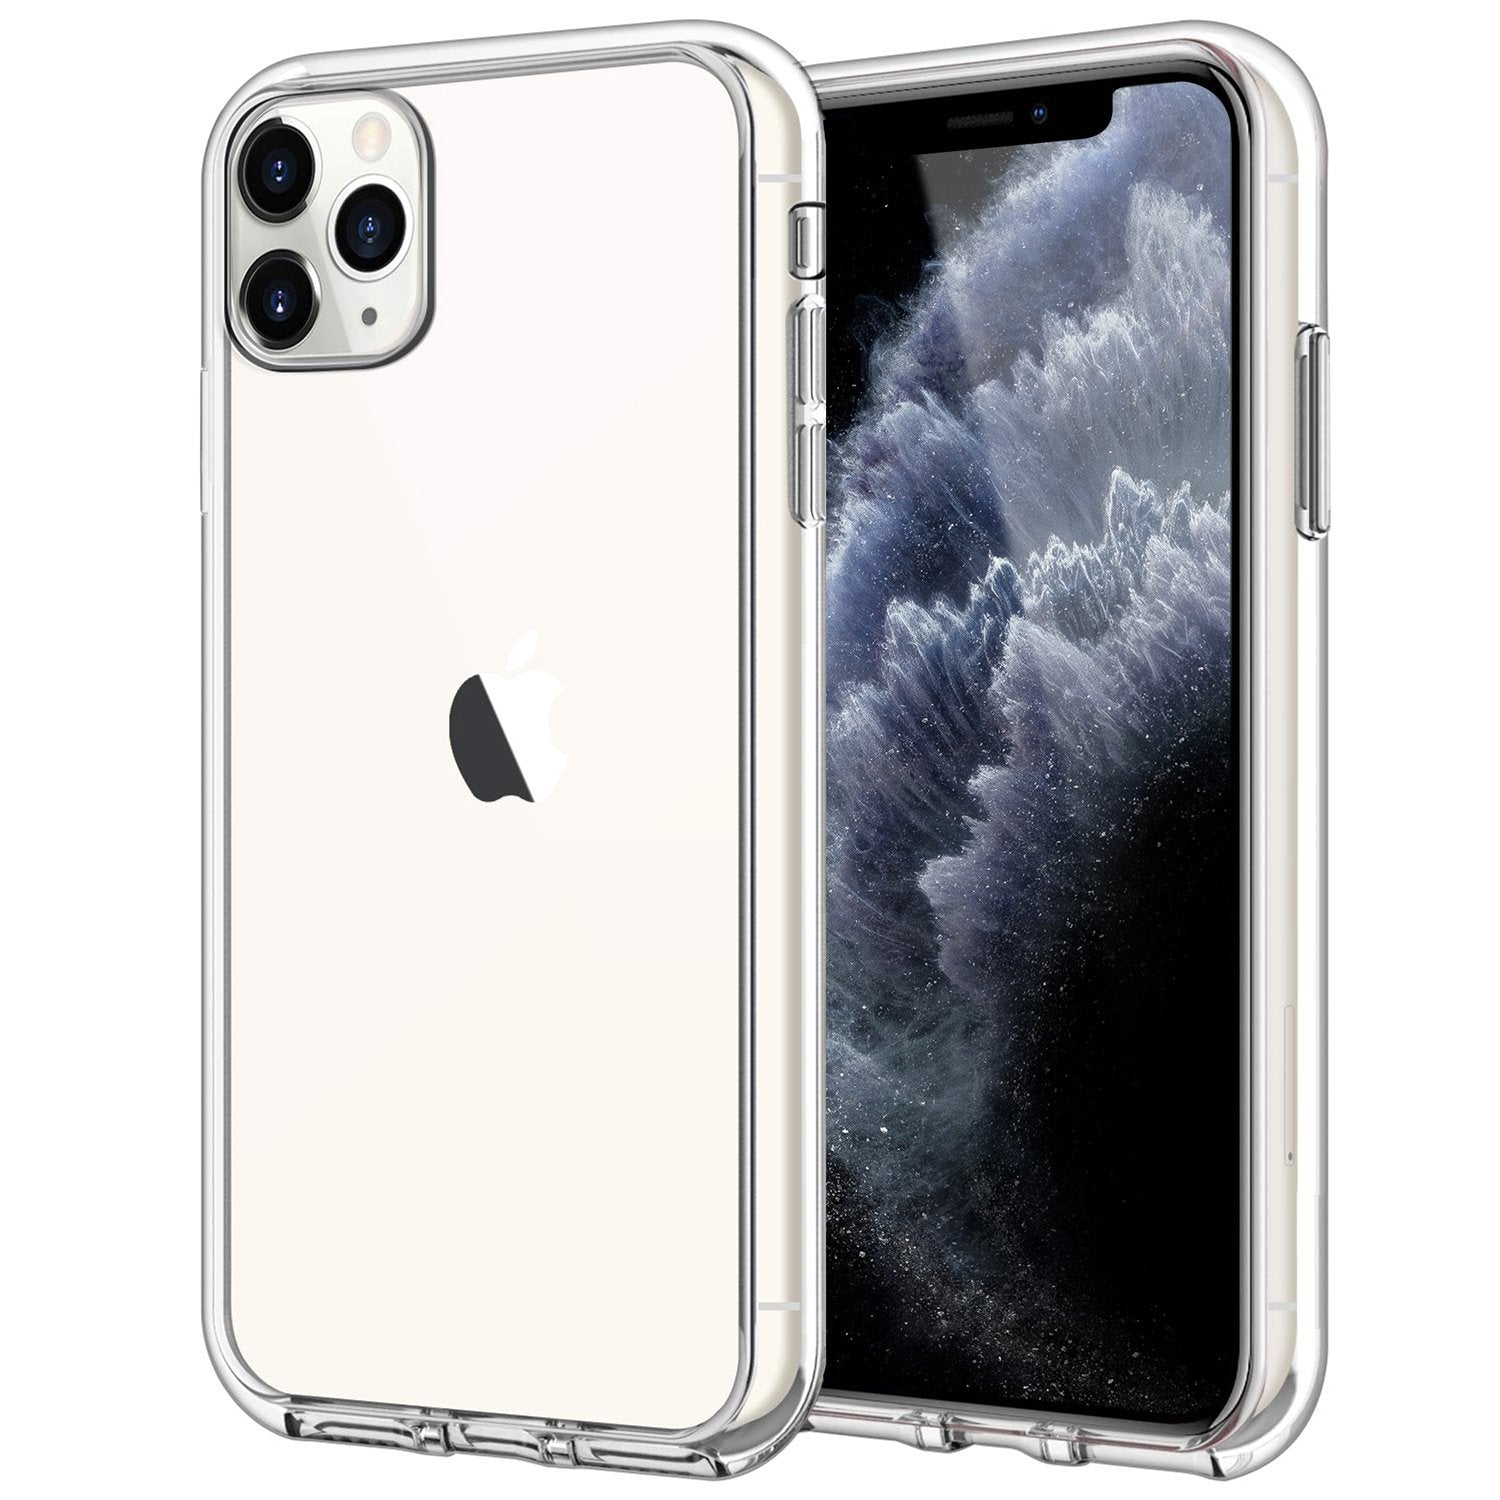 Case for iPhone 11 Pro Max Shock Proof Soft TPU Silicone Phone Clear Slim Cover